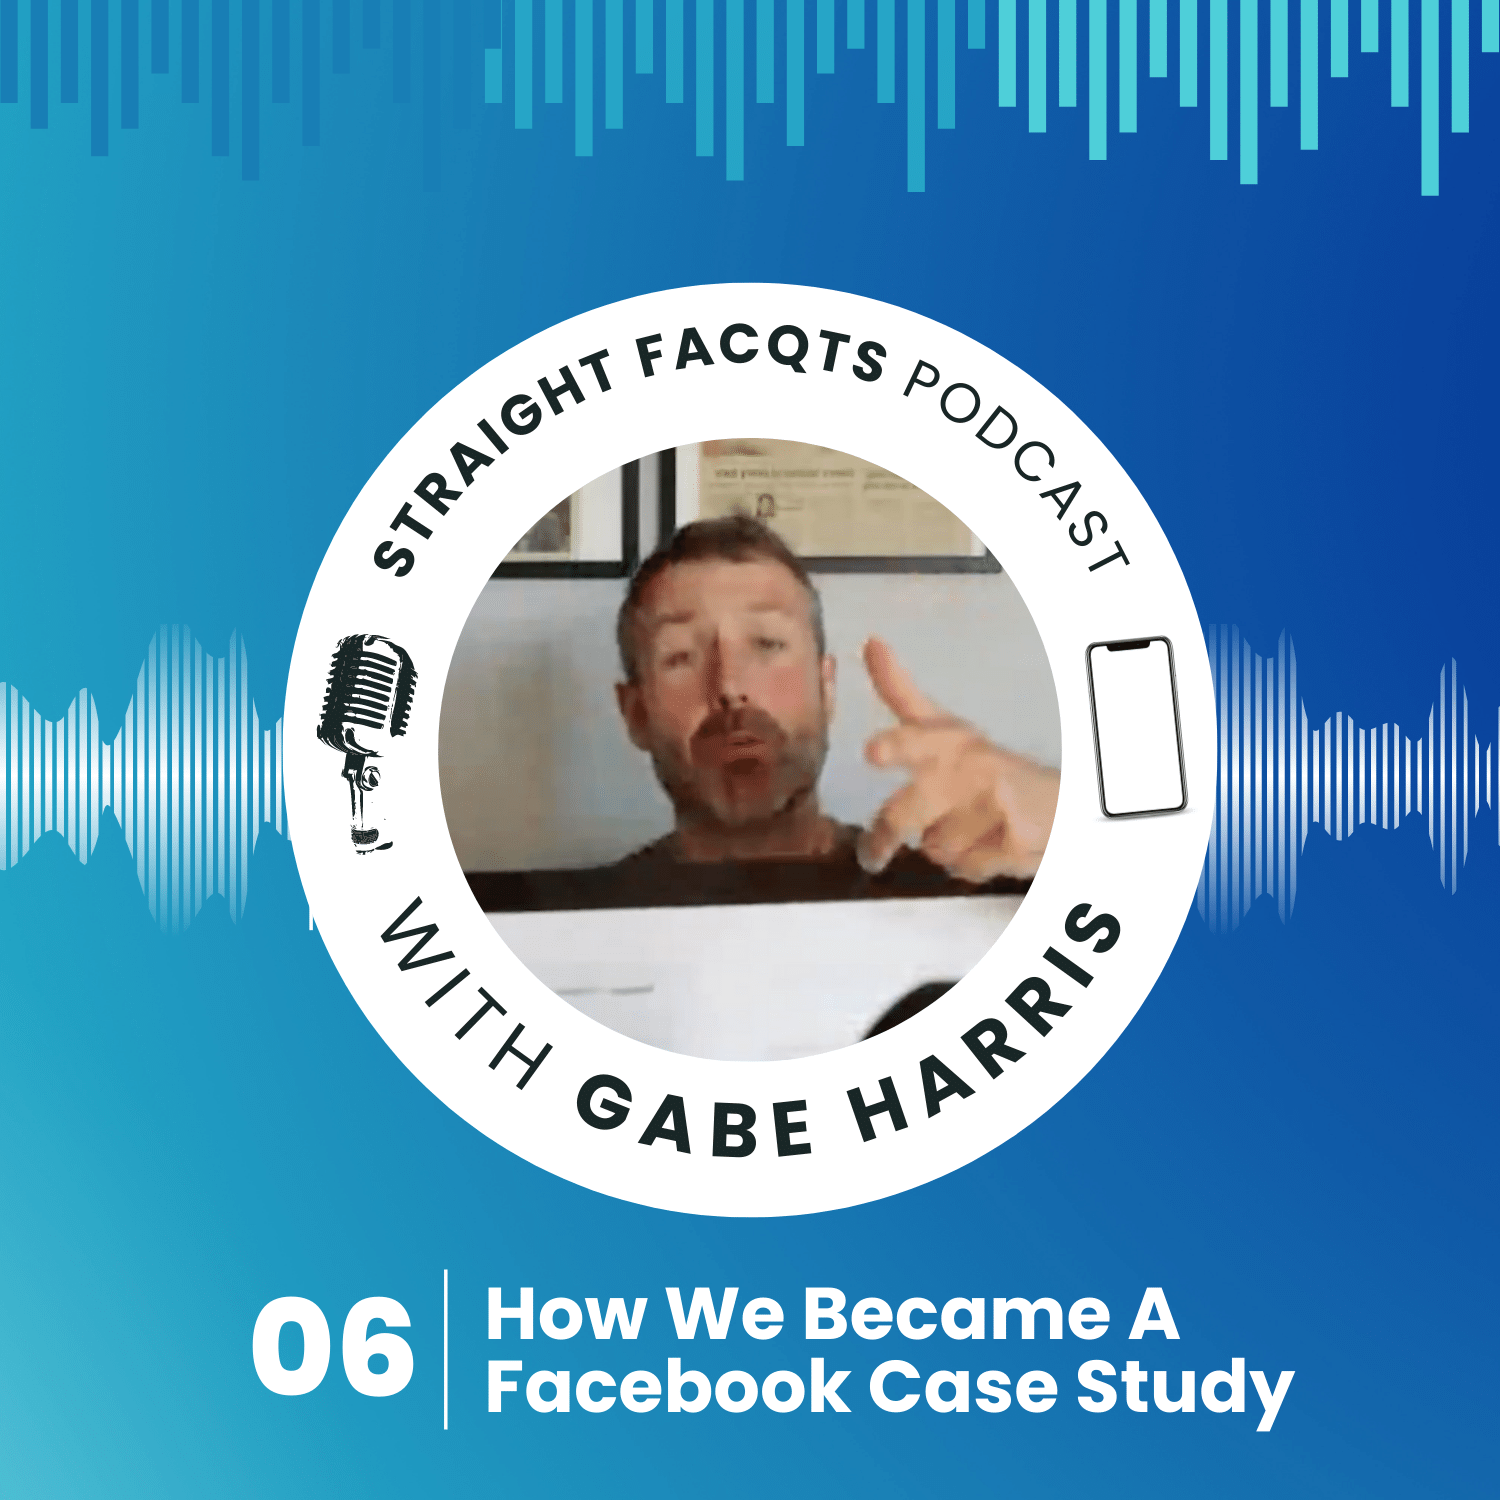 How We Became A Facebook Case Study | Straight Facqts Ep. 6